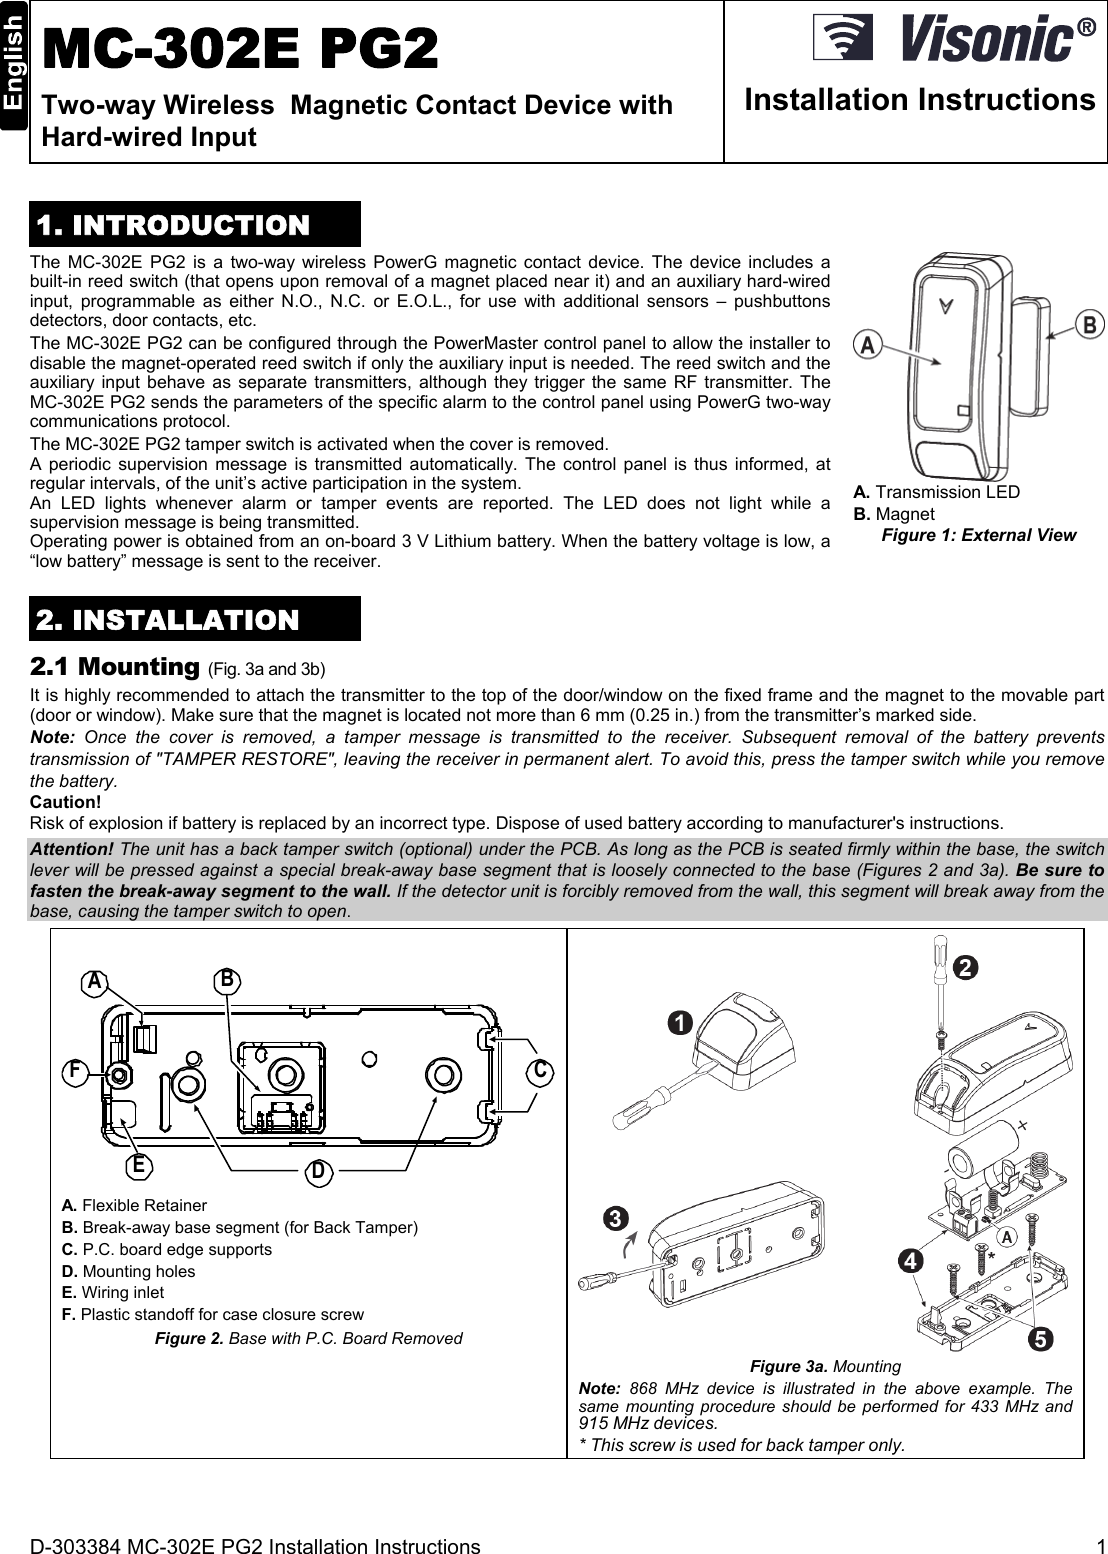 D-303384 MC-302E PG2 Installation Instructions  1  MC-302E PG2 Two-way Wireless  Magnetic Contact Device with Hard-wired Input  Installation Instructions 1. INTRODUCTION The MC-302E PG2 is a two-way wireless PowerG magnetic contact device. The device includes a built-in reed switch (that opens upon removal of a magnet placed near it) and an auxiliary hard-wired input, programmable as either N.O., N.C. or E.O.L., for use with additional sensors – pushbuttons detectors, door contacts, etc. The MC-302E PG2 can be configured through the PowerMaster control panel to allow the installer to disable the magnet-operated reed switch if only the auxiliary input is needed. The reed switch and the auxiliary input behave as separate transmitters, although they trigger the same RF transmitter. The MC-302E PG2 sends the parameters of the specific alarm to the control panel using PowerG two-way communications protocol.  The MC-302E PG2 tamper switch is activated when the cover is removed.  A periodic supervision message is transmitted automatically. The control panel is thus informed, at regular intervals, of the unit’s active participation in the system. An LED lights whenever alarm or tamper events are reported. The LED does not light while a supervision message is being transmitted. Operating power is obtained from an on-board 3 V Lithium battery. When the battery voltage is low, a “low battery” message is sent to the receiver.  A. Transmission LED  B. Magnet Figure 1: External View 2. INSTALLATION 2.1 Mounting (Fig. 3a and 3b) It is highly recommended to attach the transmitter to the top of the door/window on the fixed frame and the magnet to the movable part (door or window). Make sure that the magnet is located not more than 6 mm (0.25 in.) from the transmitter’s marked side.  Note:  Once the cover is removed, a tamper message is transmitted to the receiver. Subsequent removal of the battery prevents transmission of &quot;TAMPER RESTORE&quot;, leaving the receiver in permanent alert. To avoid this, press the tamper switch while you remove the battery. Caution! Risk of explosion if battery is replaced by an incorrect type. Dispose of used battery according to manufacturer&apos;s instructions. Attention! The unit has a back tamper switch (optional) under the PCB. As long as the PCB is seated firmly within the base, the switch lever will be pressed against a special break-away base segment that is loosely connected to the base (Figures 2 and 3a). Be sure to fasten the break-away segment to the wall. If the detector unit is forcibly removed from the wall, this segment will break away from the base, causing the tamper switch to open. BACDEF A. Flexible Retainer B. Break-away base segment (for Back Tamper) C. P.C. board edge supports D. Mounting holes E. Wiring inlet F. Plastic standoff for case closure screw Figure 2. Base with P.C. Board Removed   Figure 3a. Mounting Note: 868 MHz device is illustrated in the above example. The same mounting procedure should be performed for 433 MHz and 915 MHz devices. * This screw is used for back tamper only. 